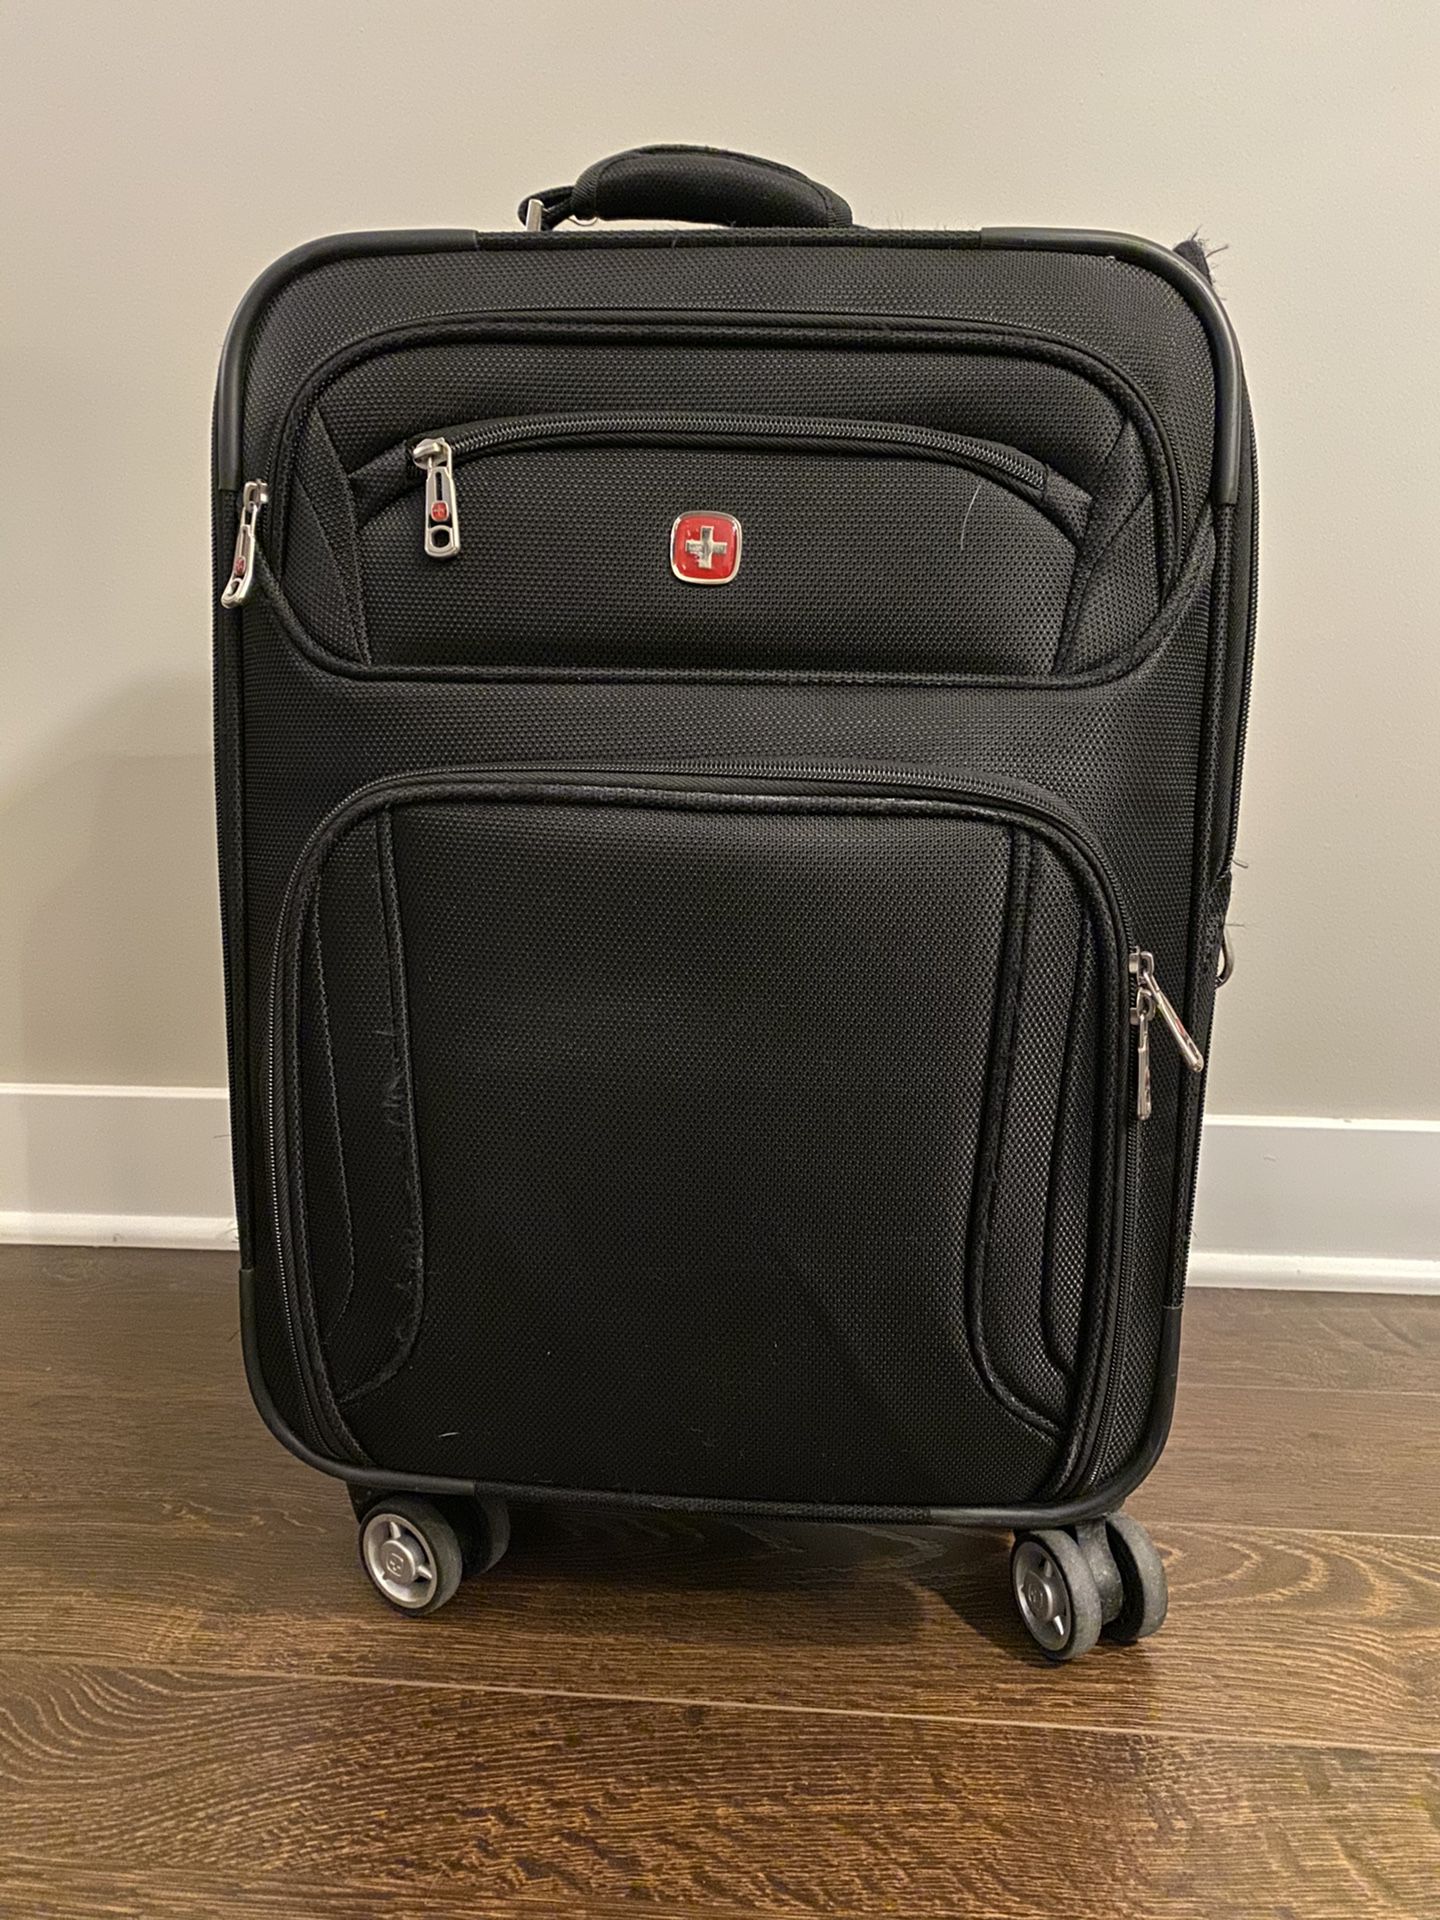 Good Condition Swiss Gear Rolling Carry On Luggage Bag